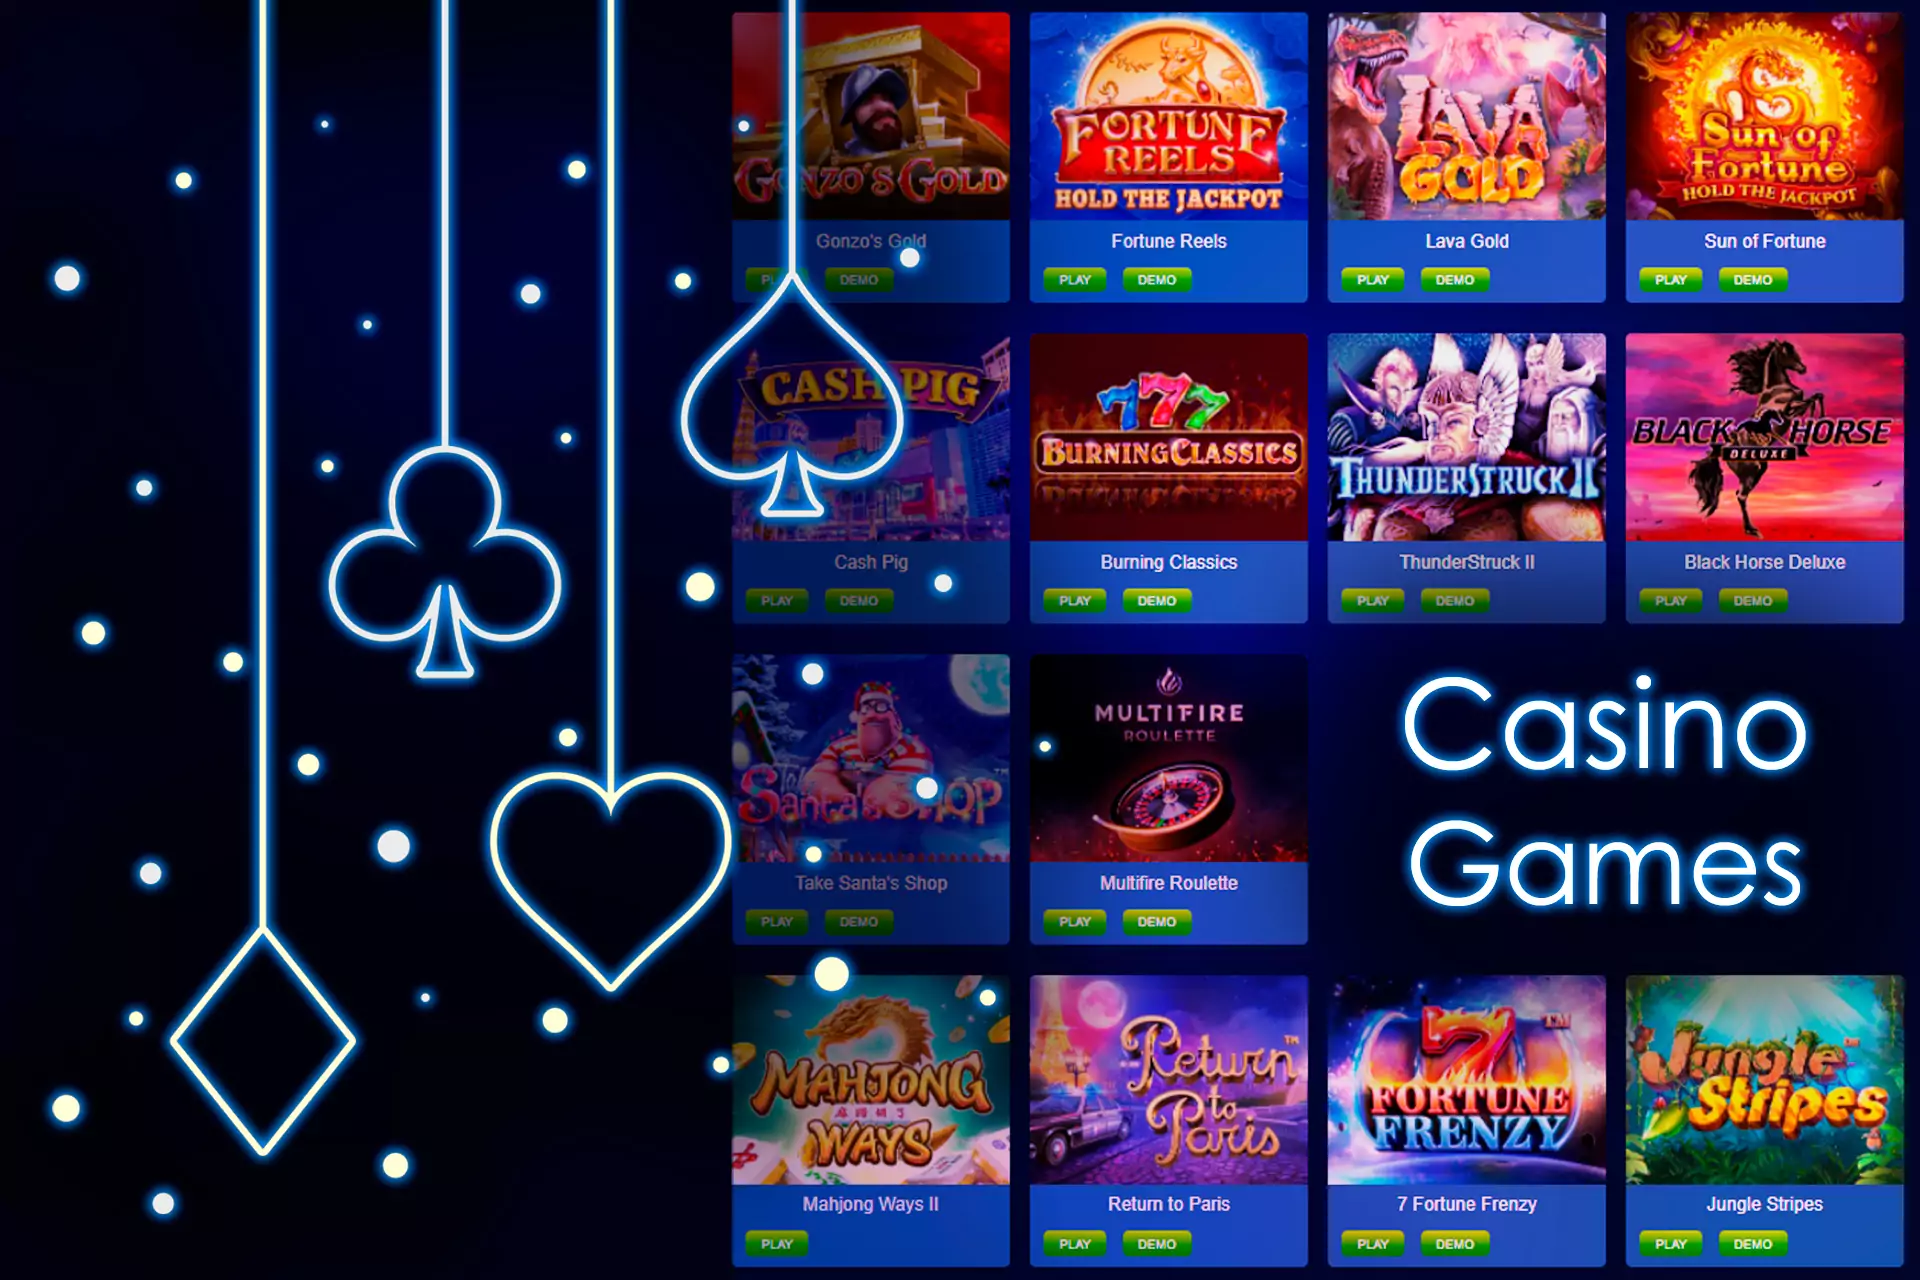 In the Casino section, JungleRaja users will find a huge list of games available to play.